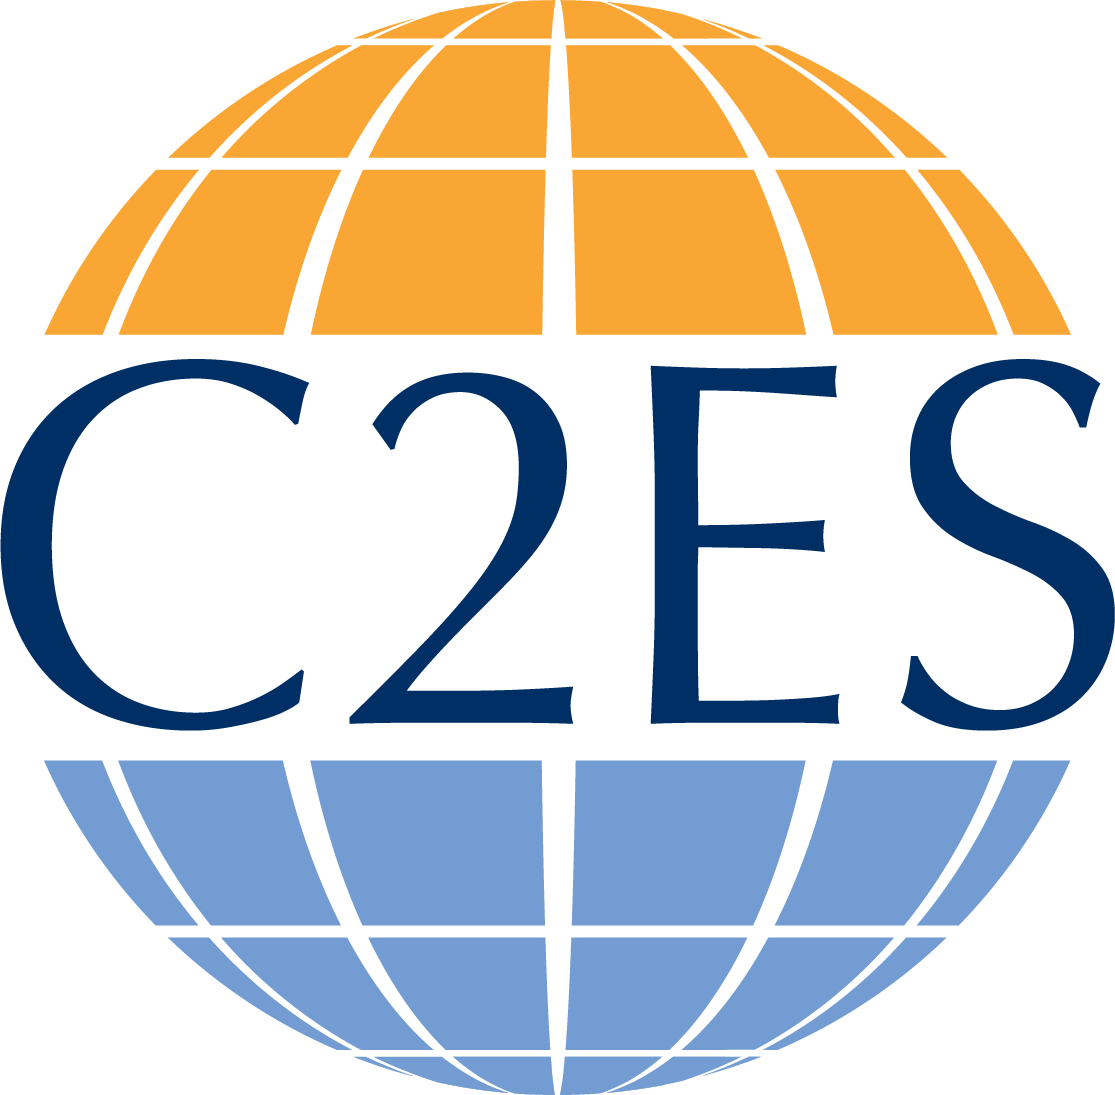 C2es Logo Final Sphere Rgb - Center For Climate And Energy Solutions (1115x1095)